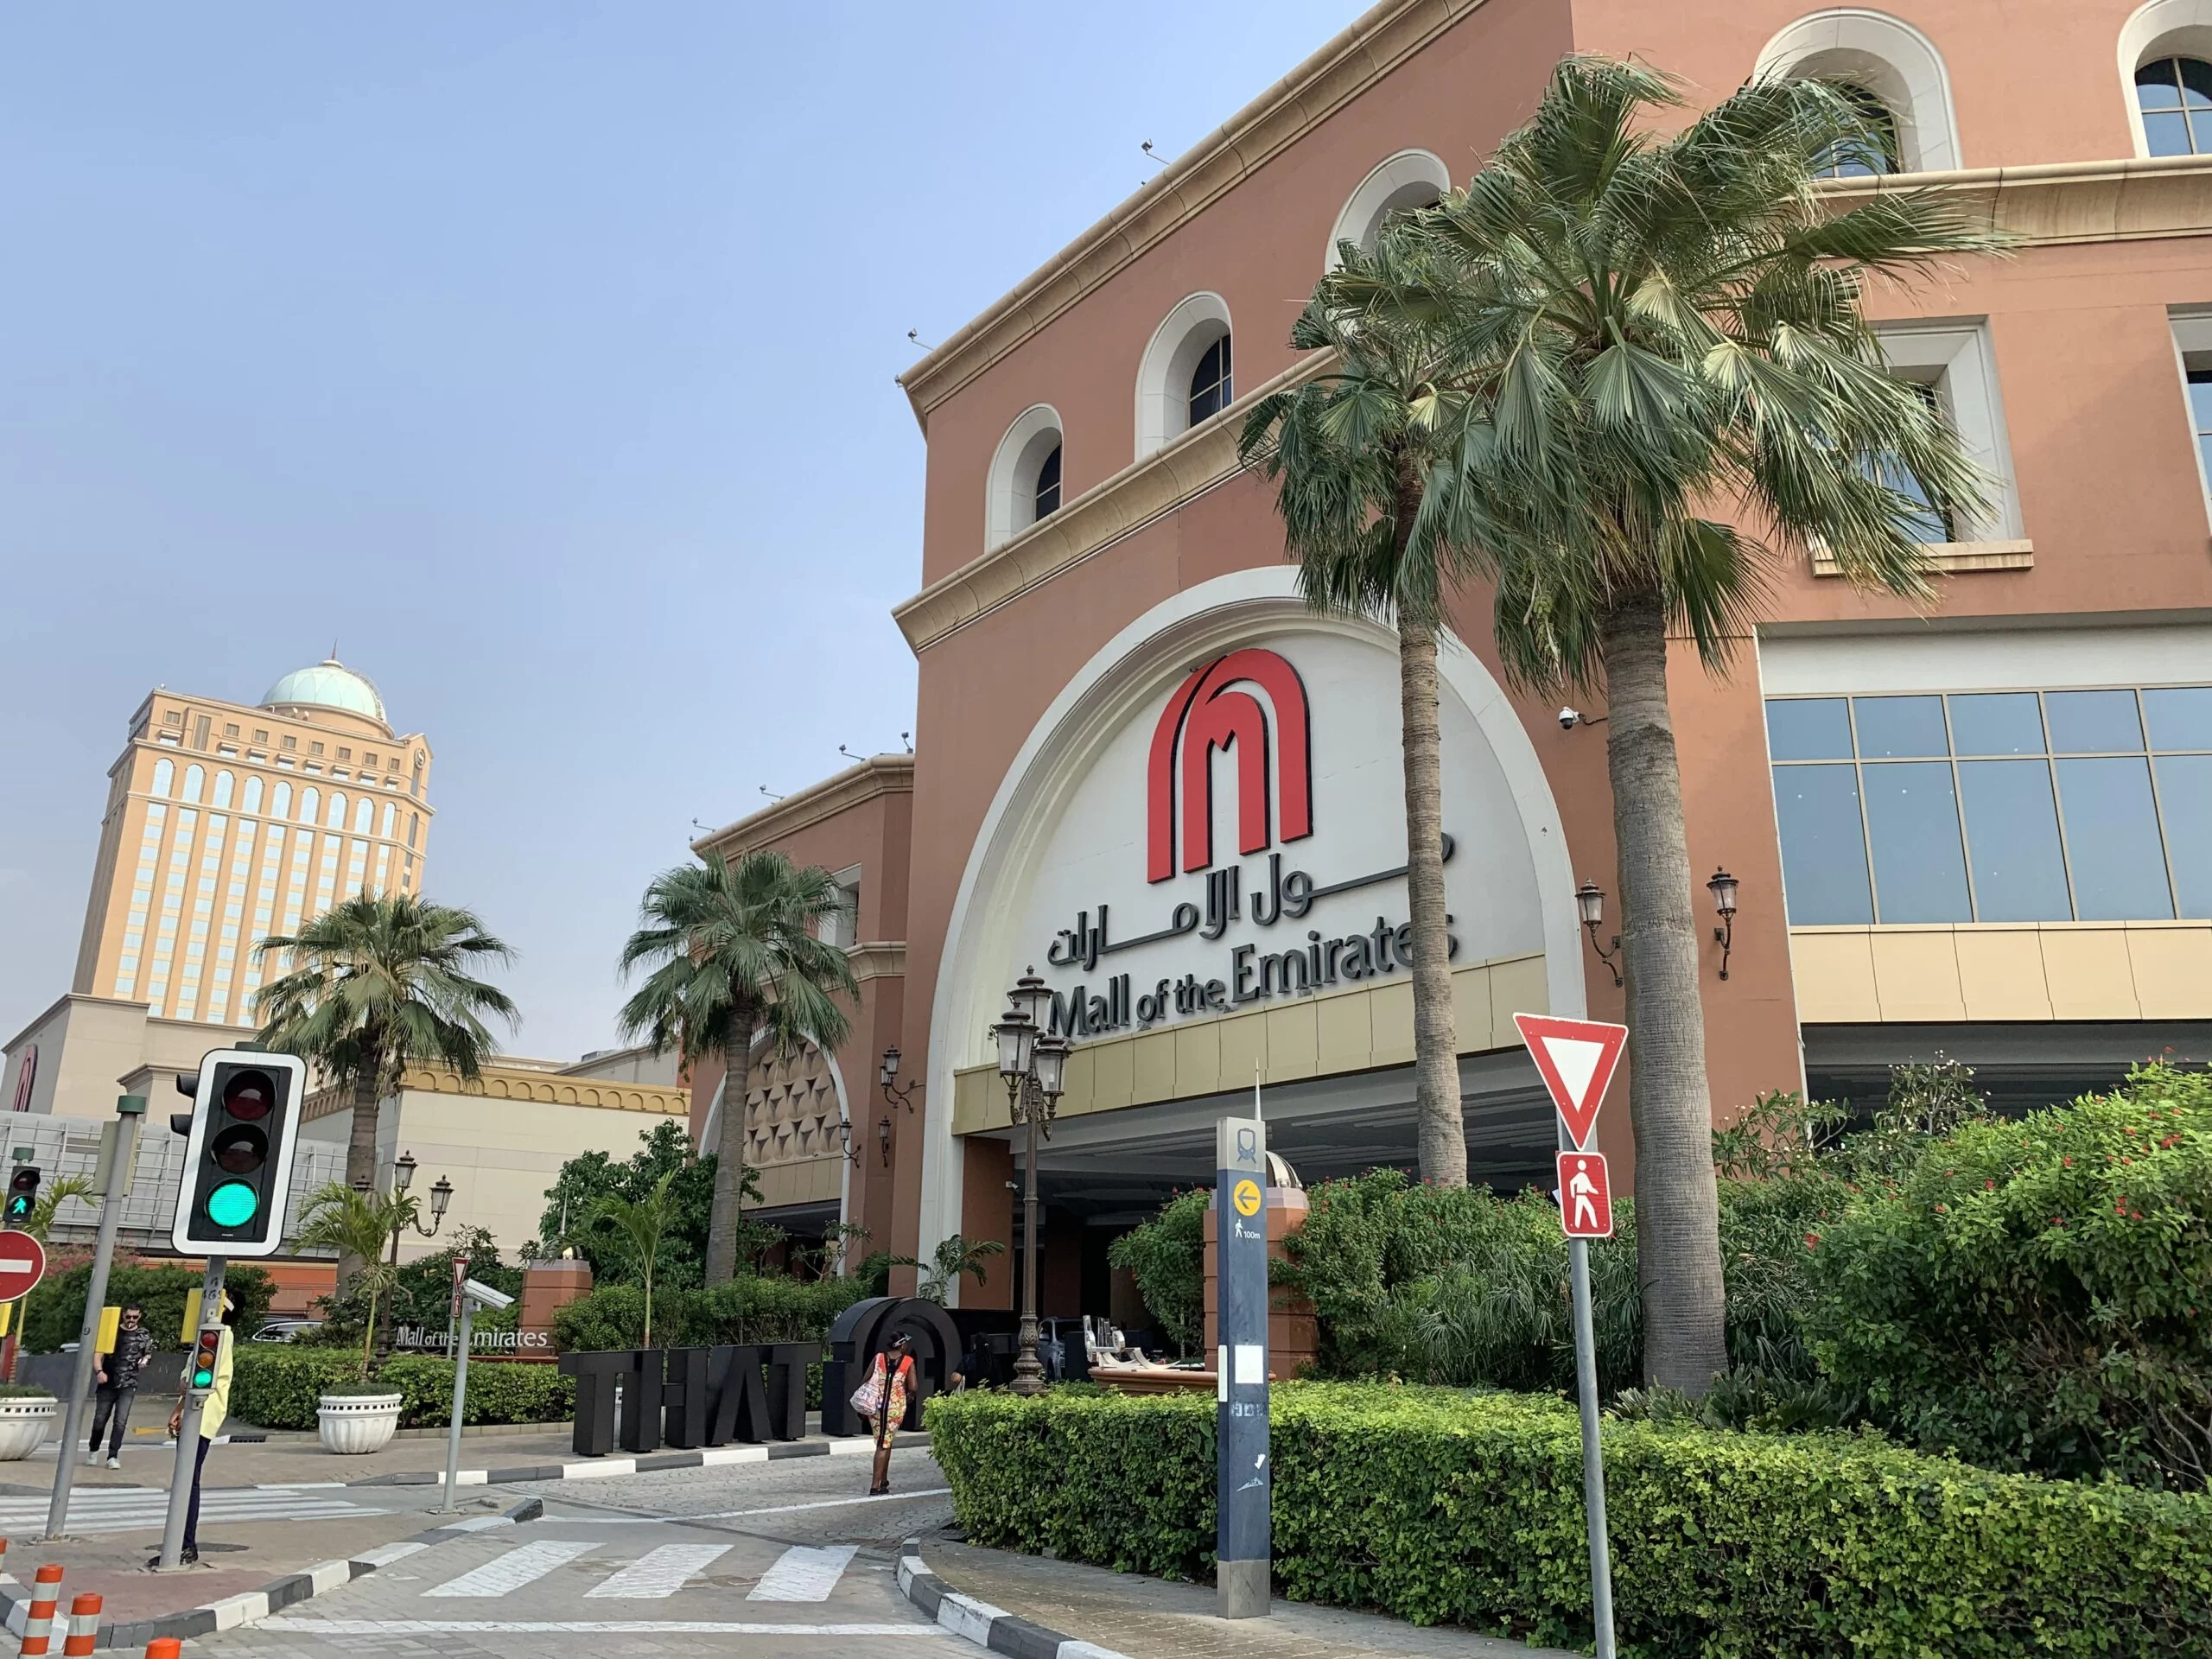 Mall Of The Emirates - Major Tourist Attractions in Dubai That Are Indoors 